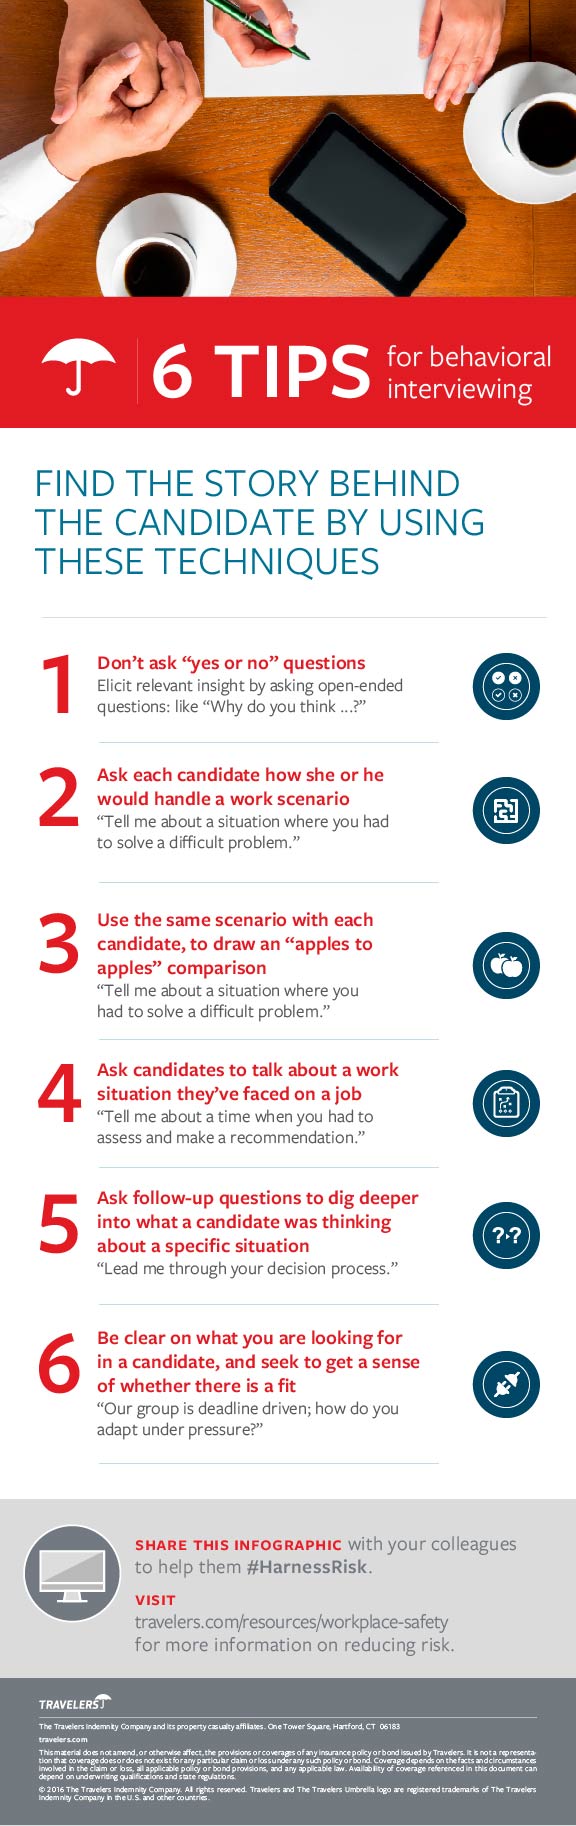 Infographic of 6 tips of behavioral interviewing